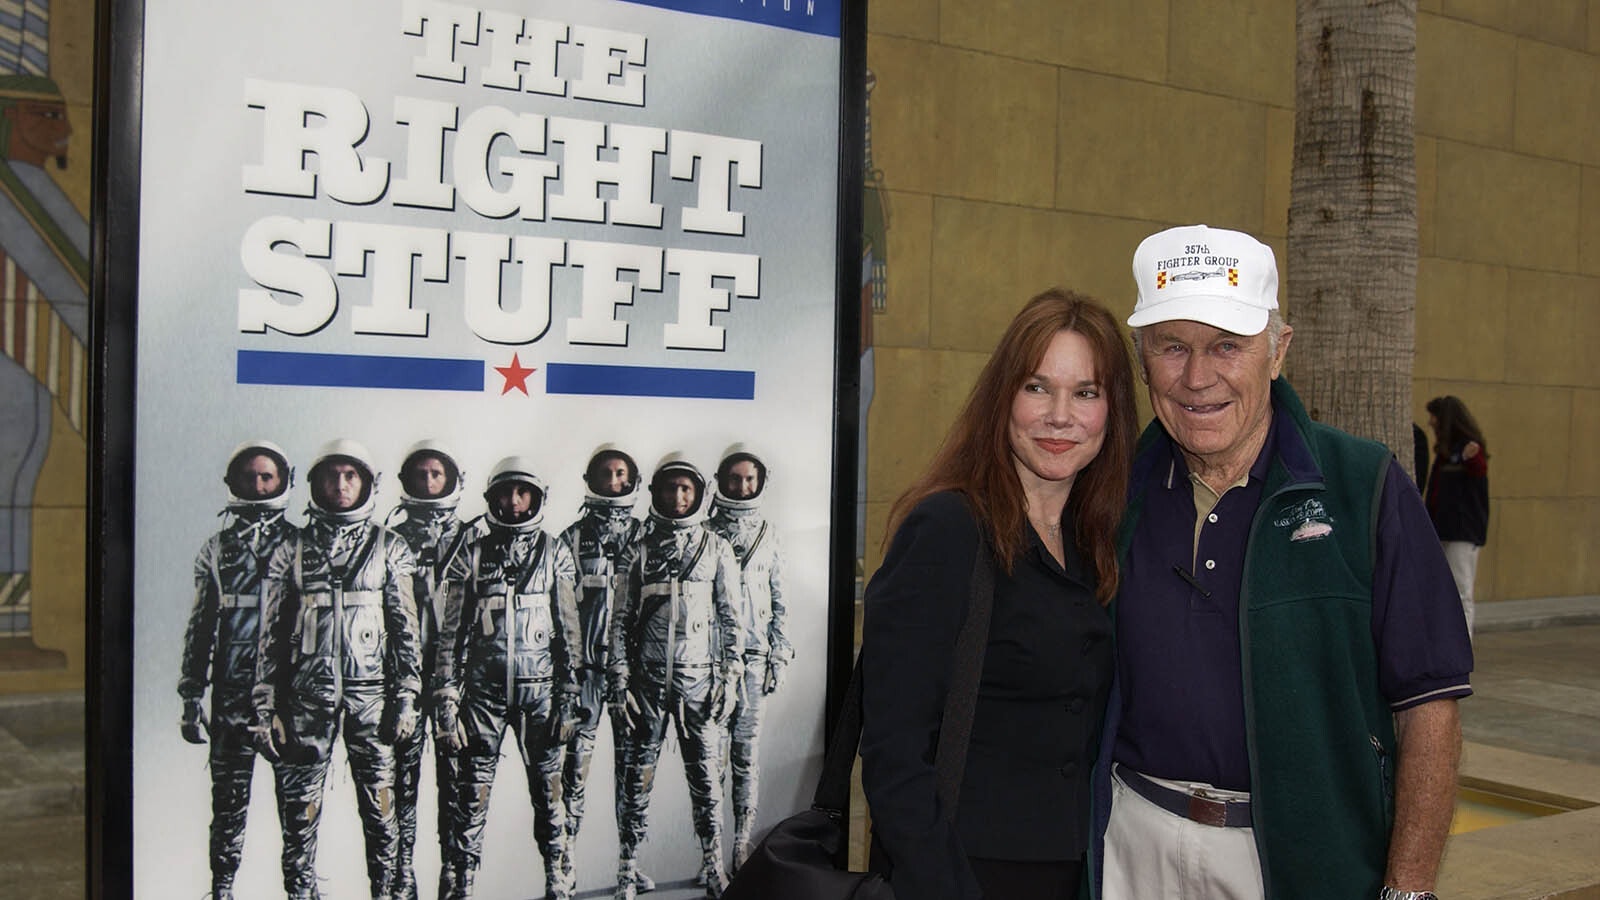 Gen. Chuck Yeager, right, and actress Barbara Hershey attend a special 20th Anniversary screening and DVD release of "The Right Stuff" at the Egyptian Theatre on June 9, 2003. in Hollywood, California.